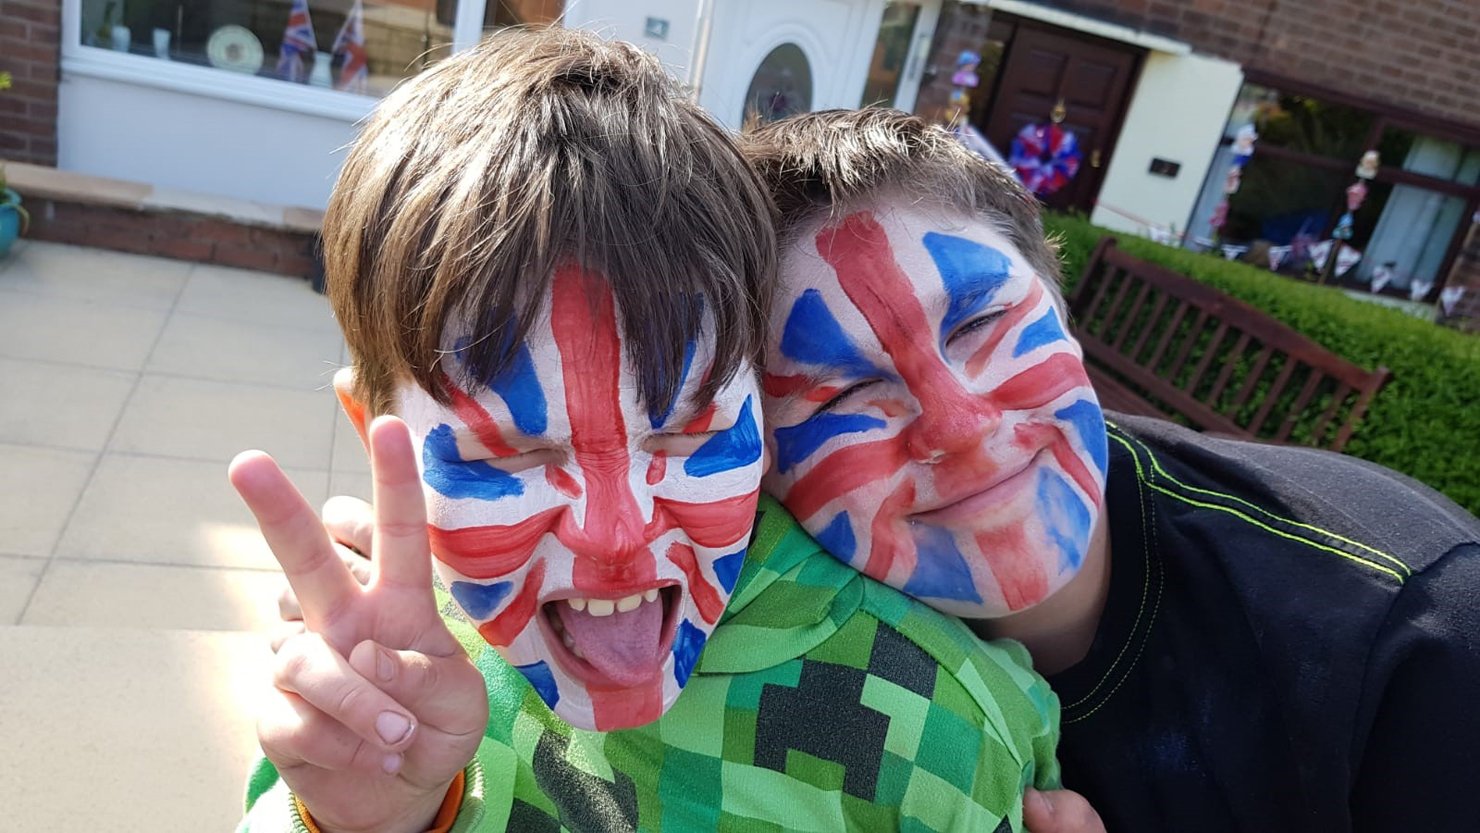 Two boys with their faces painted with the Union Jack flag